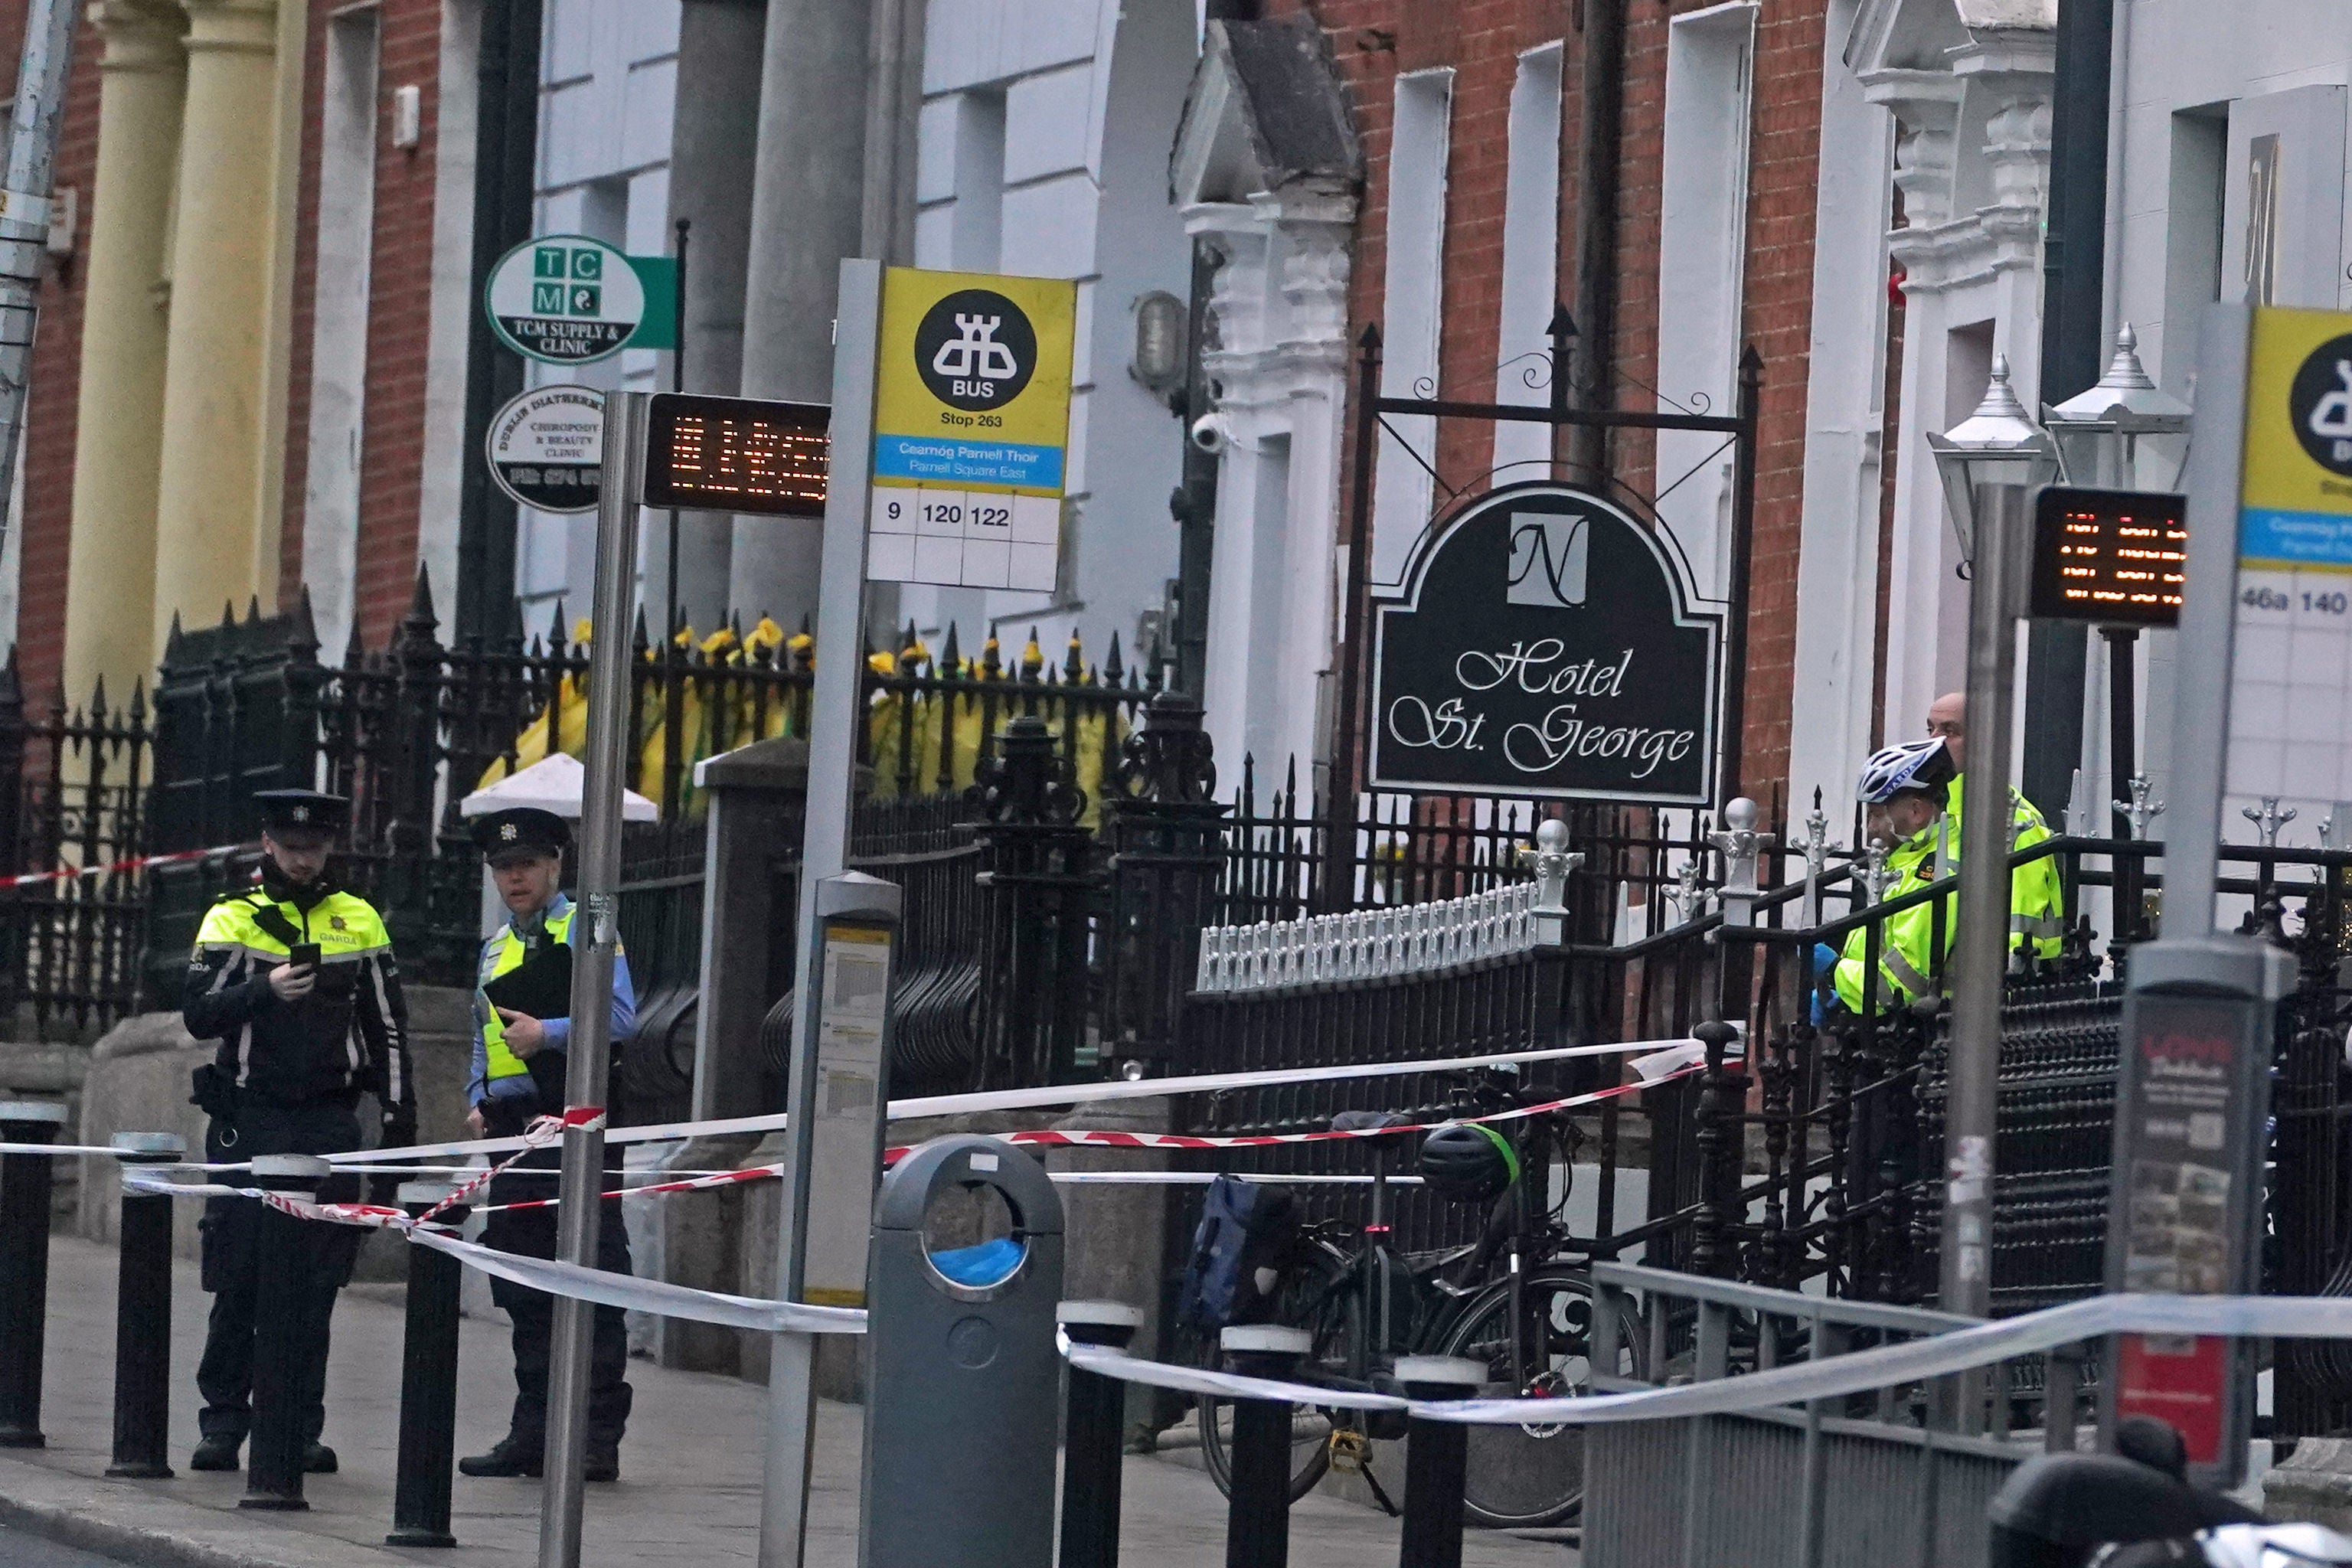 Pictures from the scene of the attack in Parnell Square East